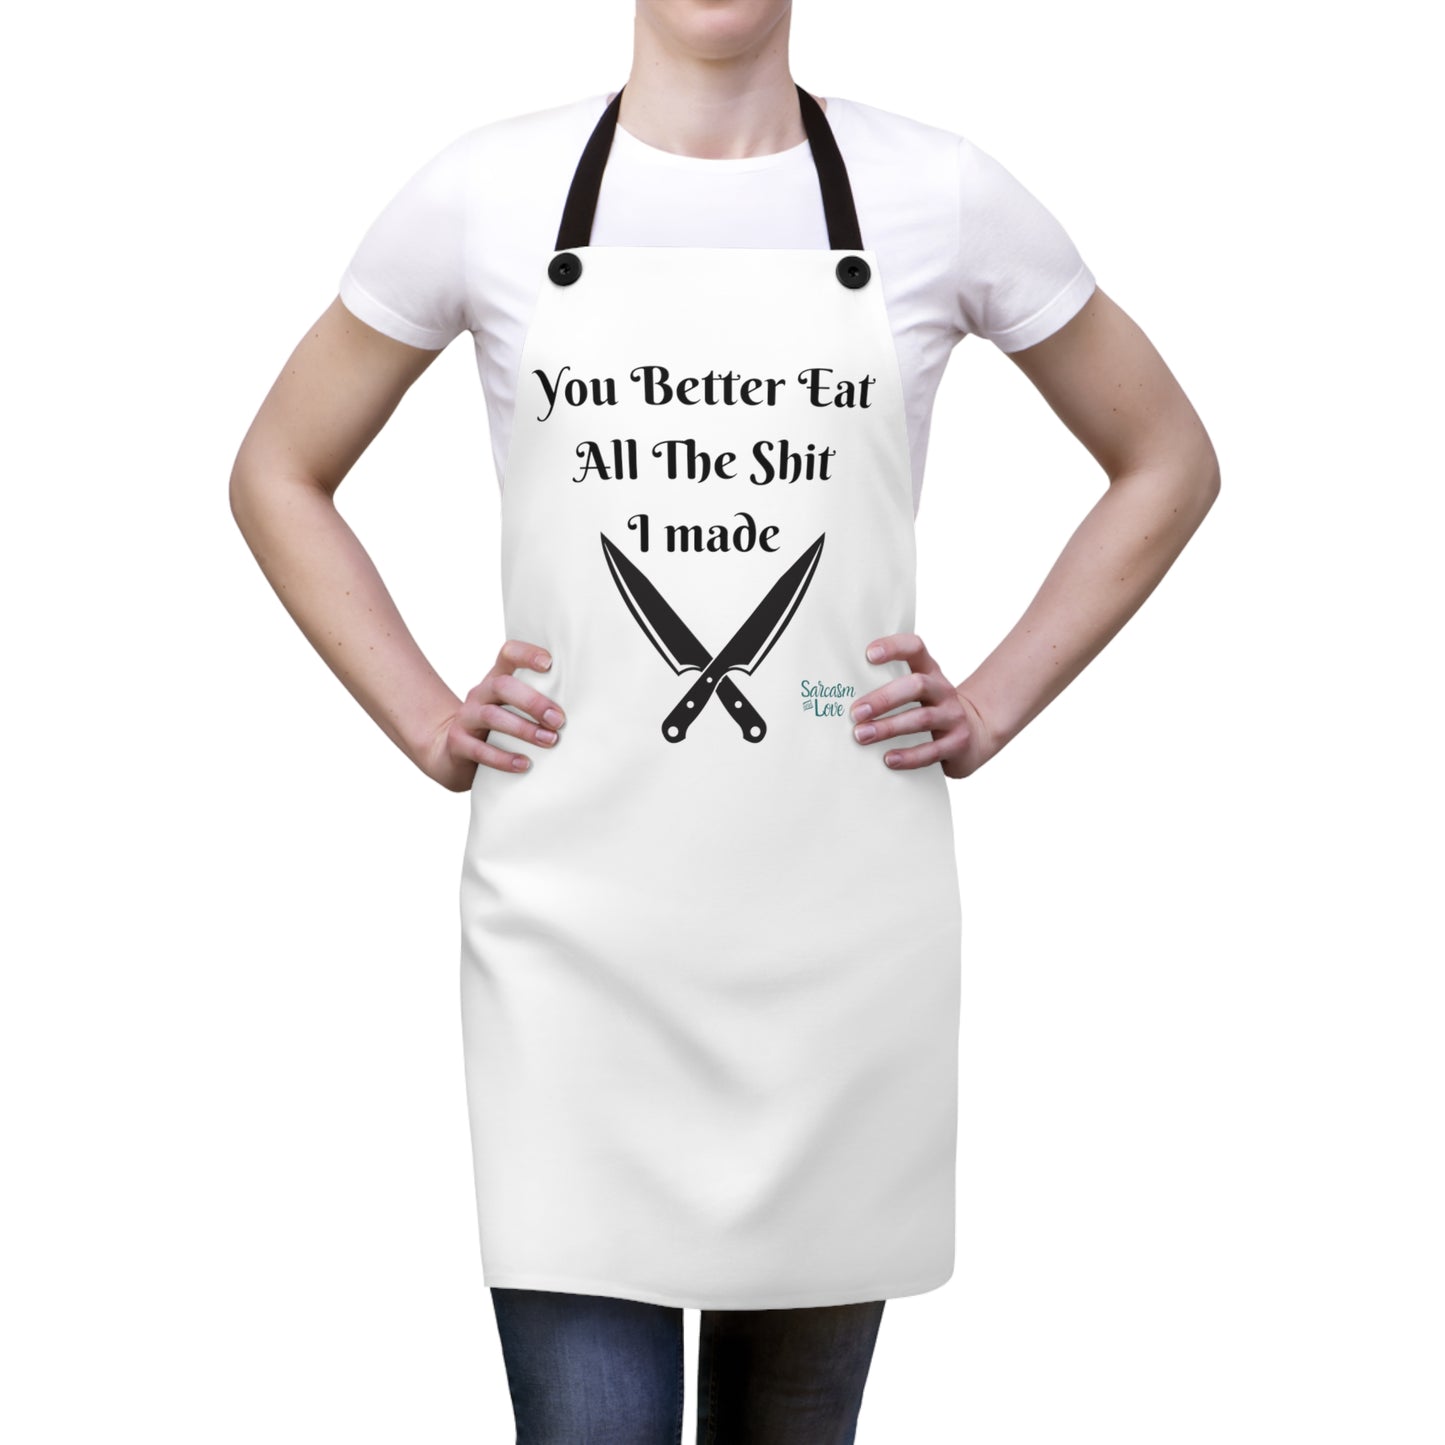 hilarious and bold apron: "You Better Eat All the Shit I Made!"